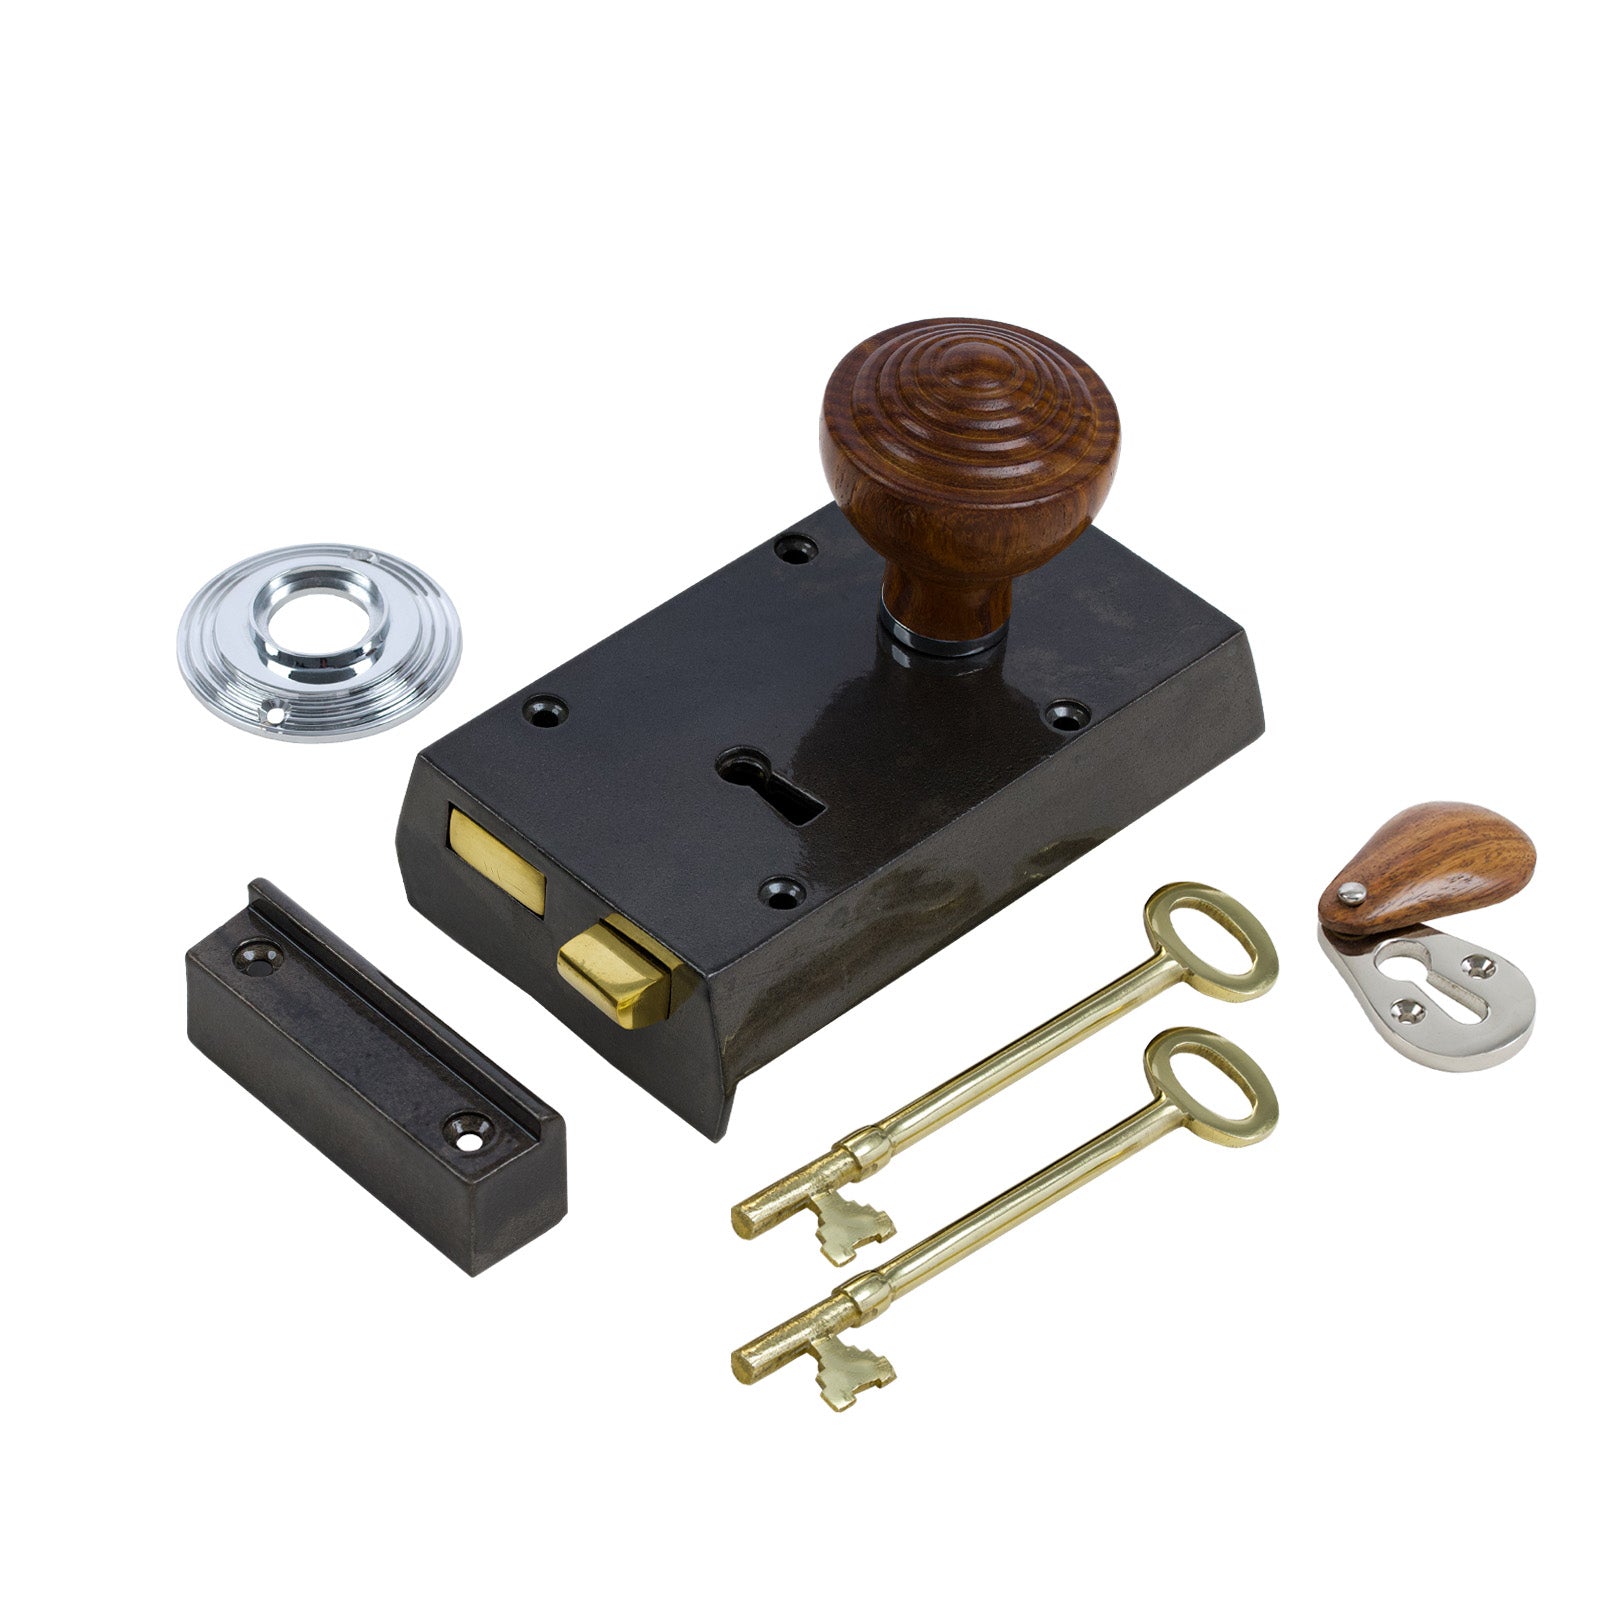 SHOW Right Handed Small Cast Iron Rim Lock With Ringed Door Knob Set - Rosewood & Chrome